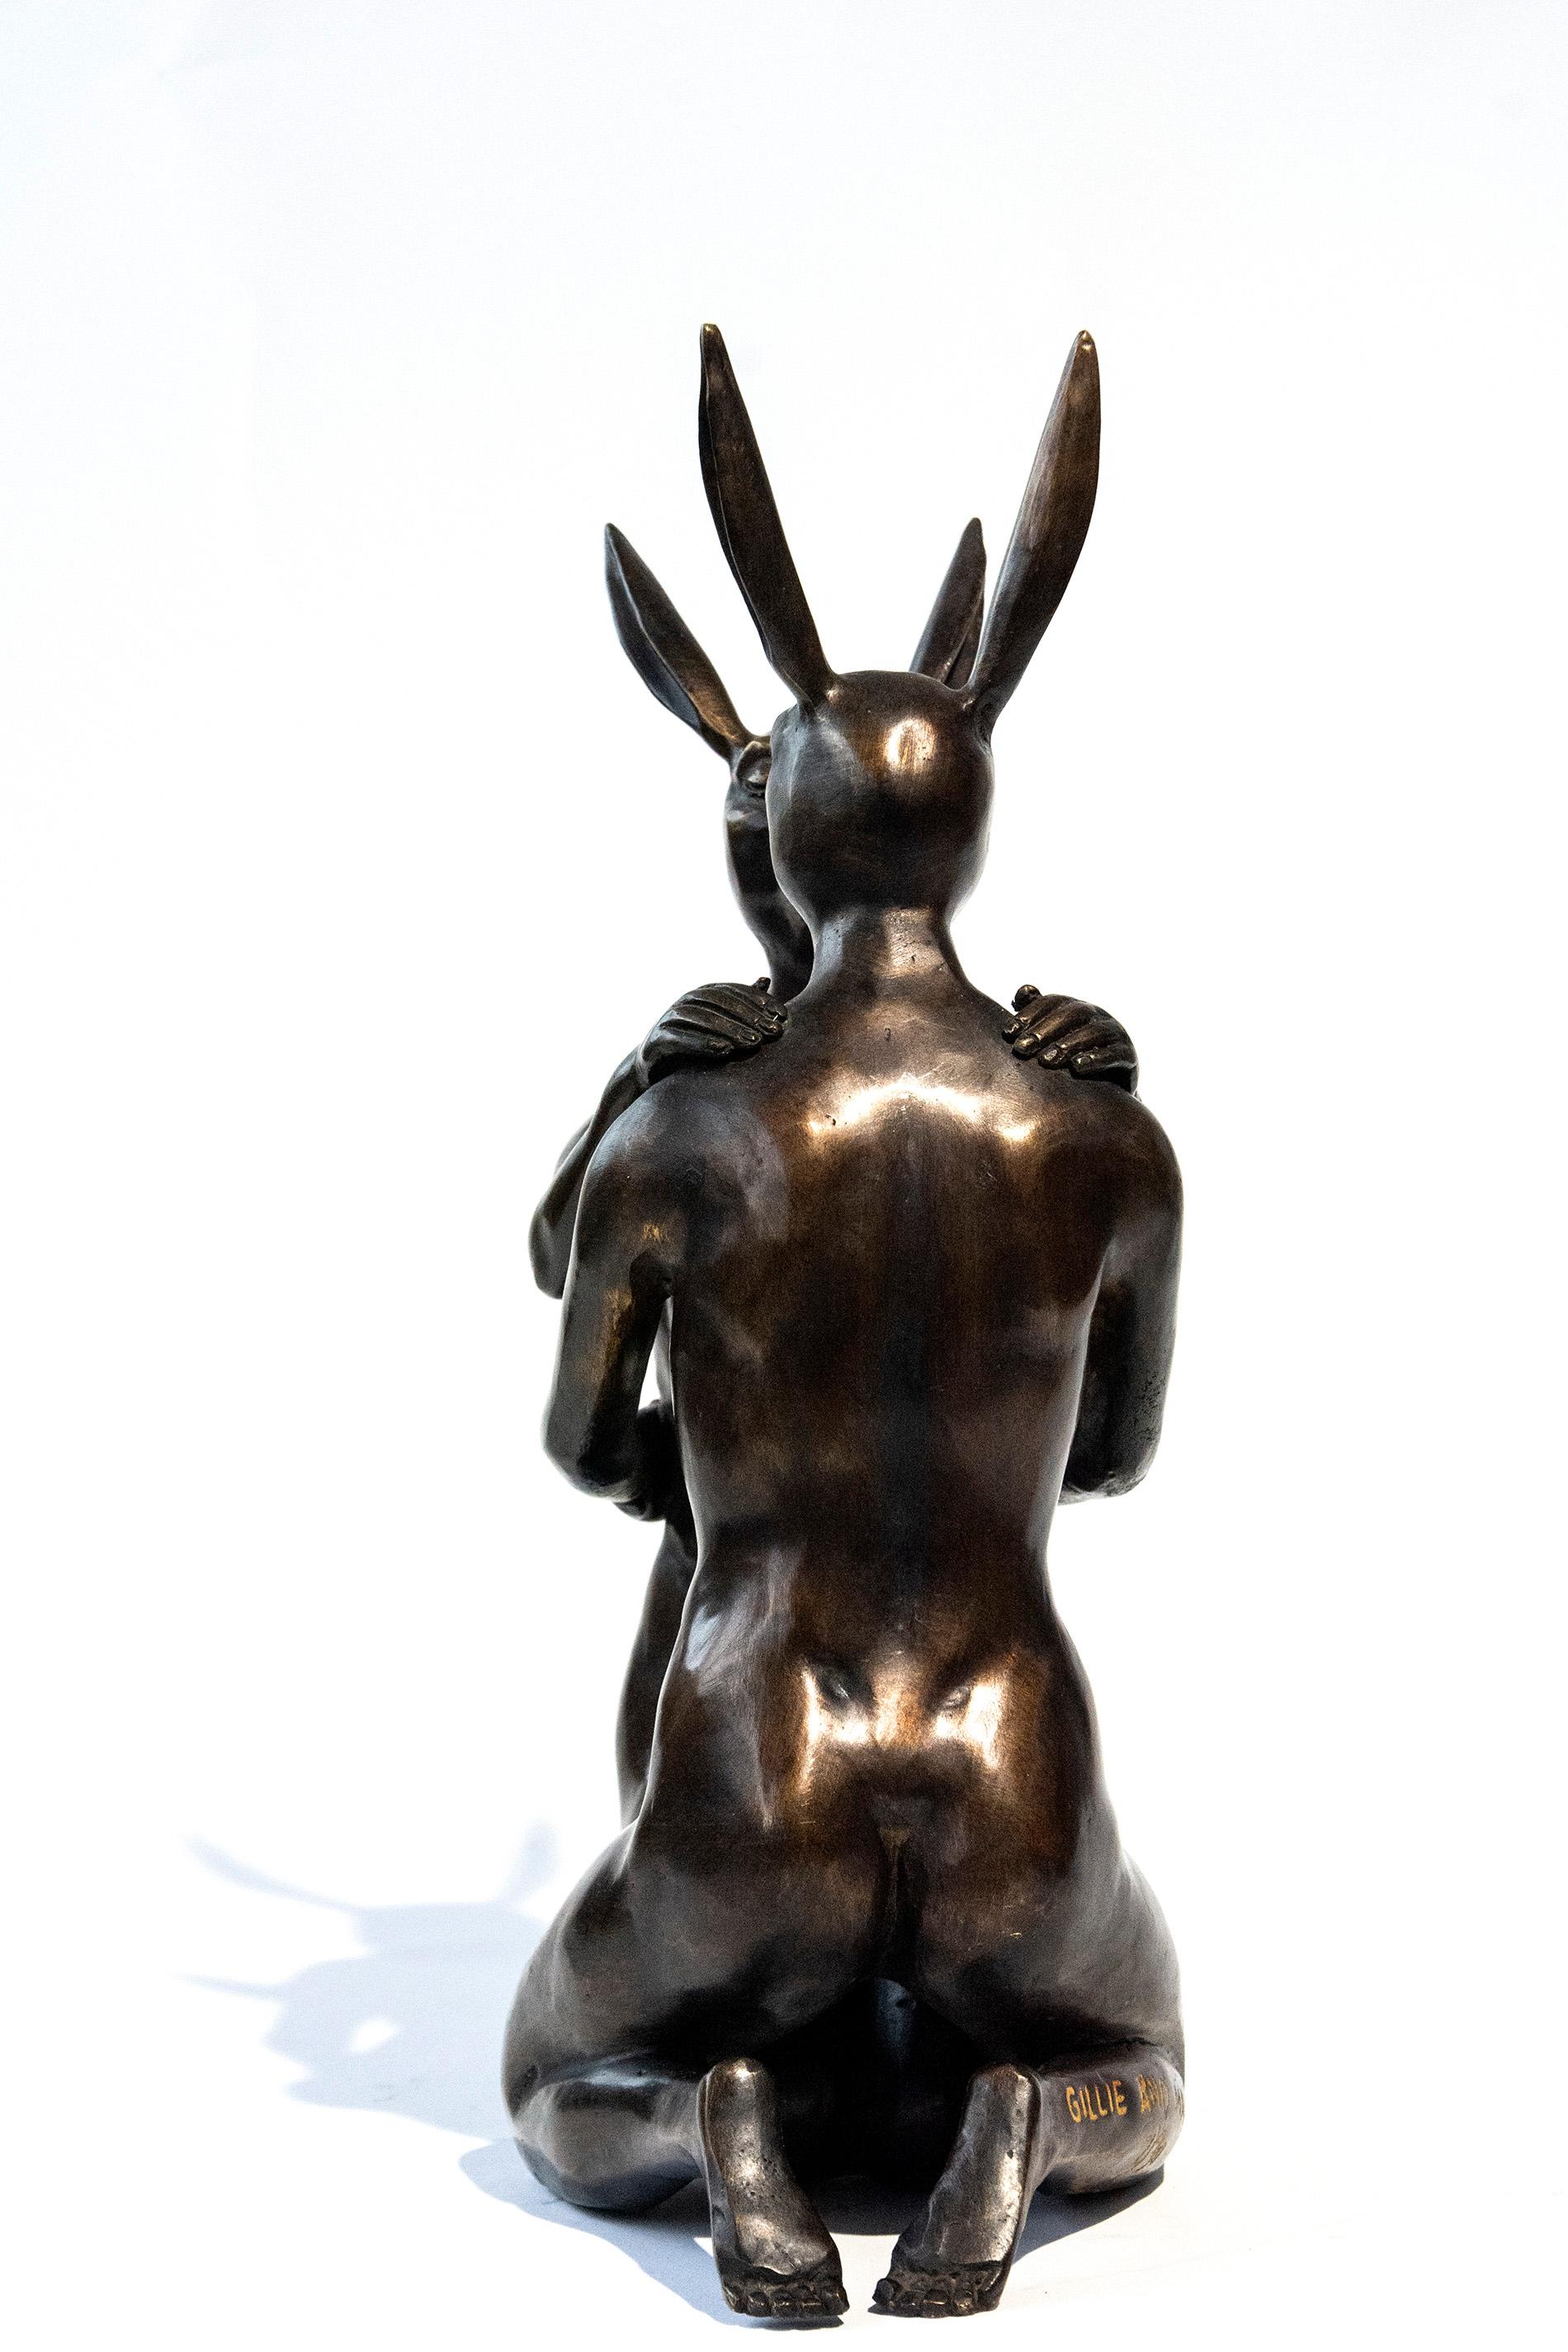 She loved being in love 7/30 - playful, figurative bronze sculpture - Contemporary Sculpture by Gillie and Marc Schattner